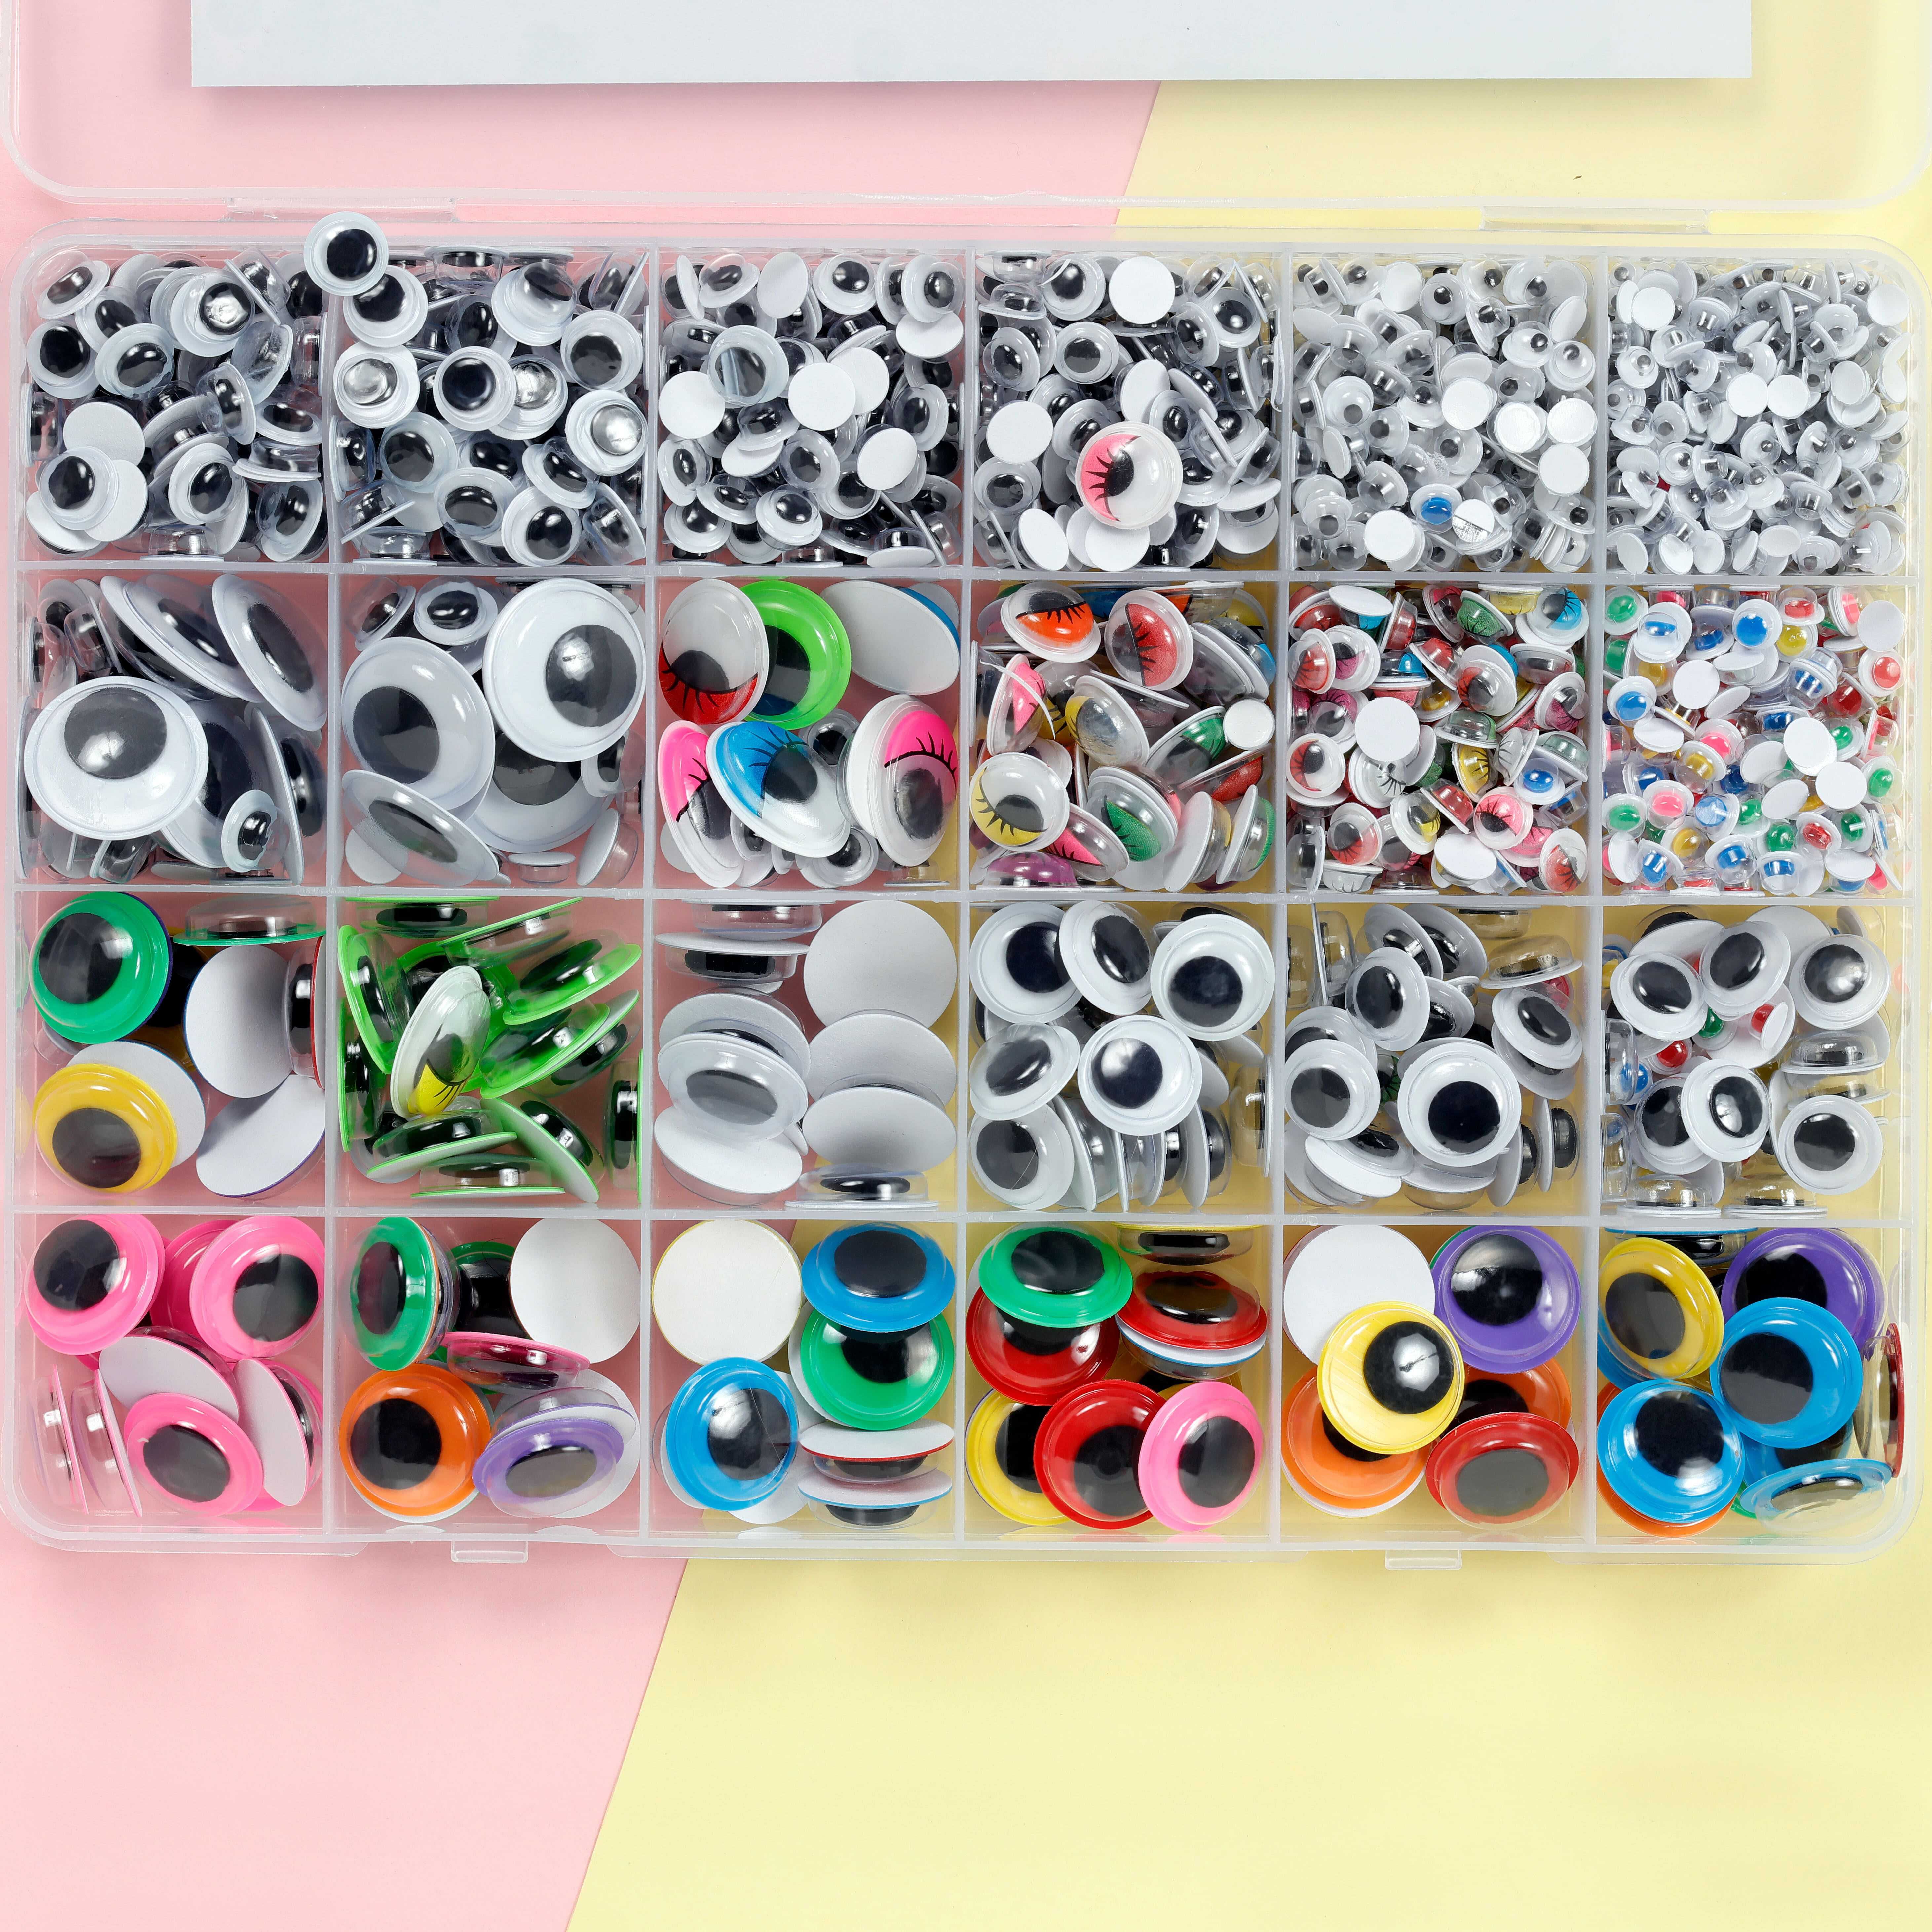 800Pcs Self Adhesive Giant Wiggly Googly Eyes for DIY Art Craft Toys  Children Hand Scrapbooking Arts Decor Eyes Craft Supplies